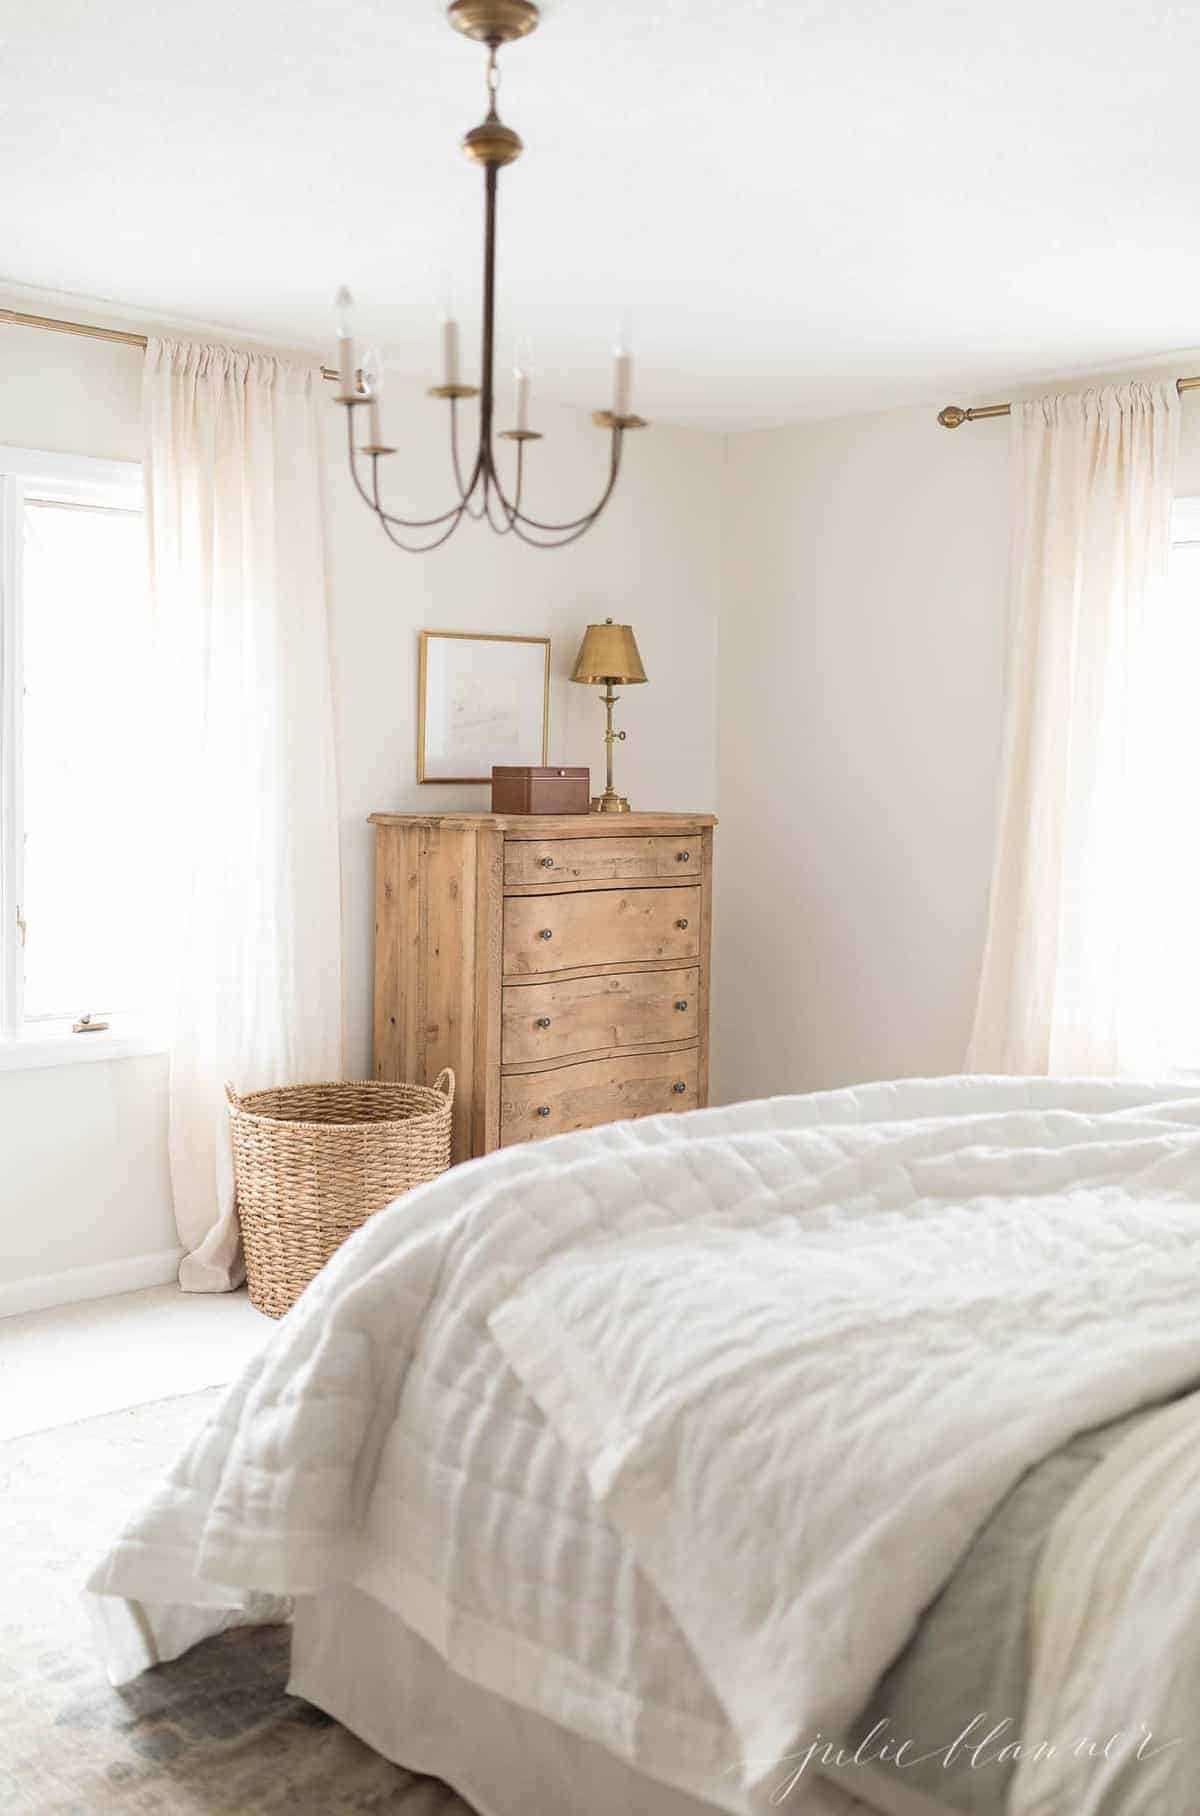 A white bedroom with wooden furniture and a brass chandelier